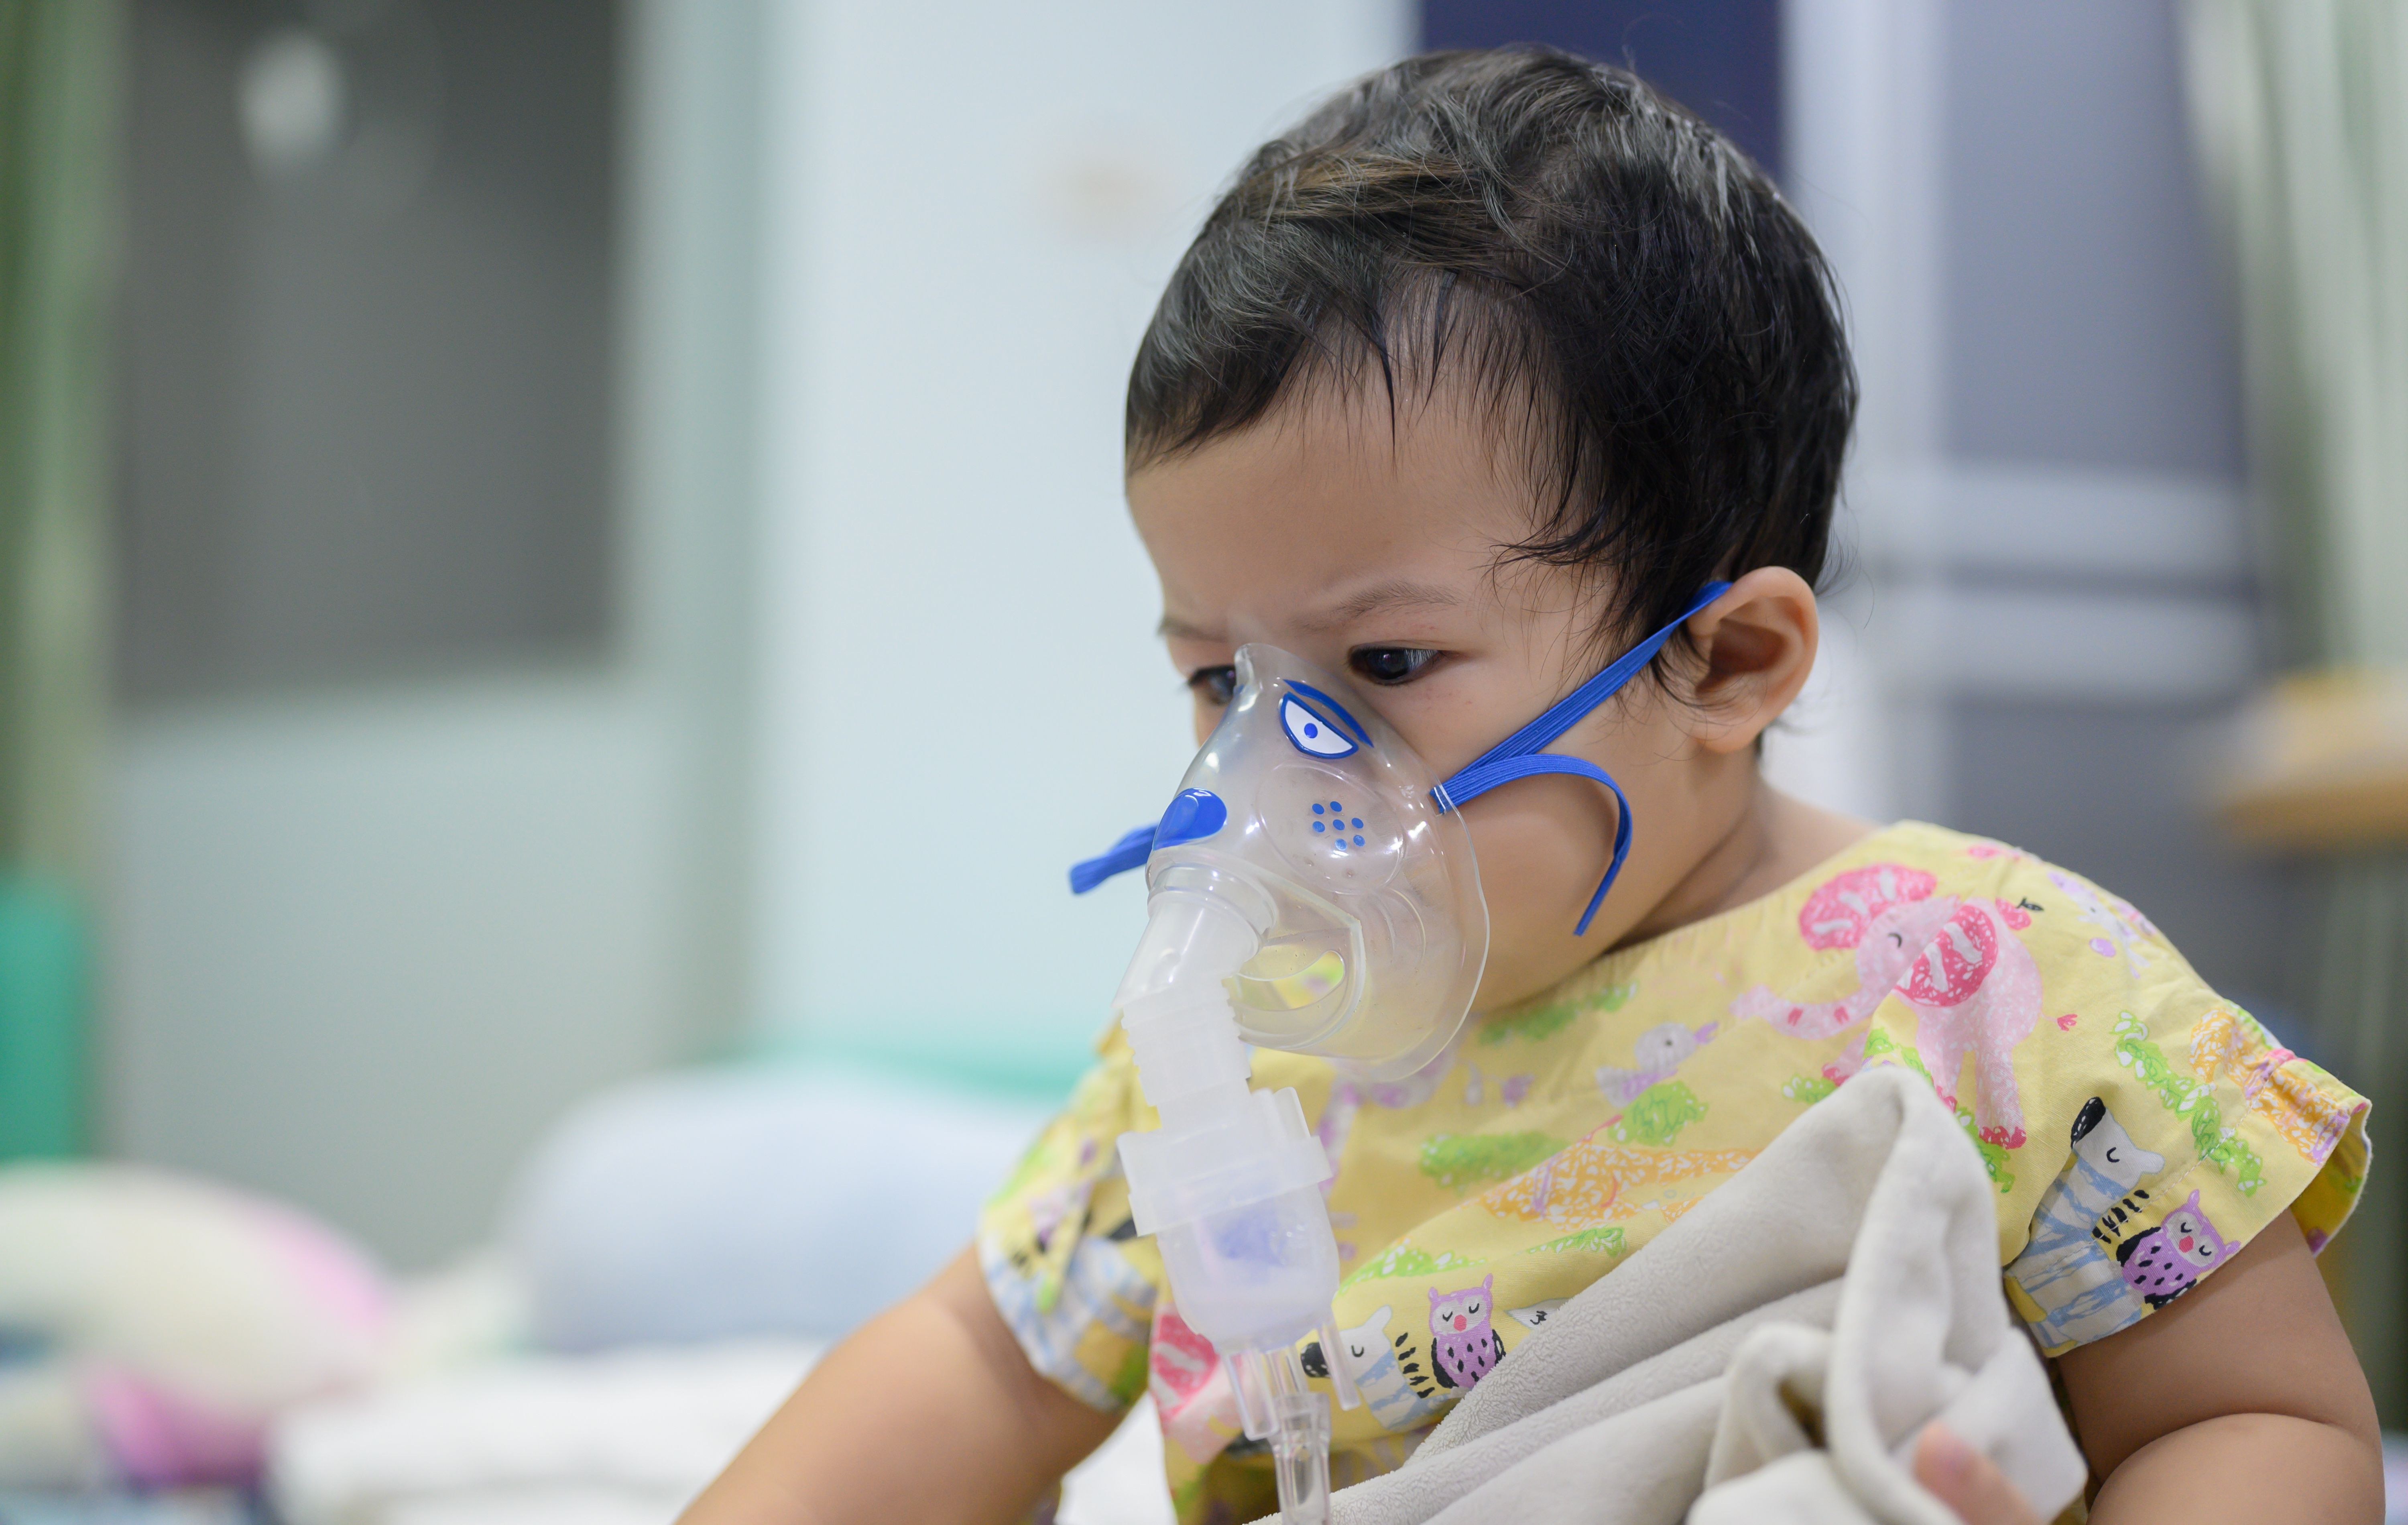 Children were hospitalized the most during the Omicron variant, by disease outcomes were the least severe during this variant.